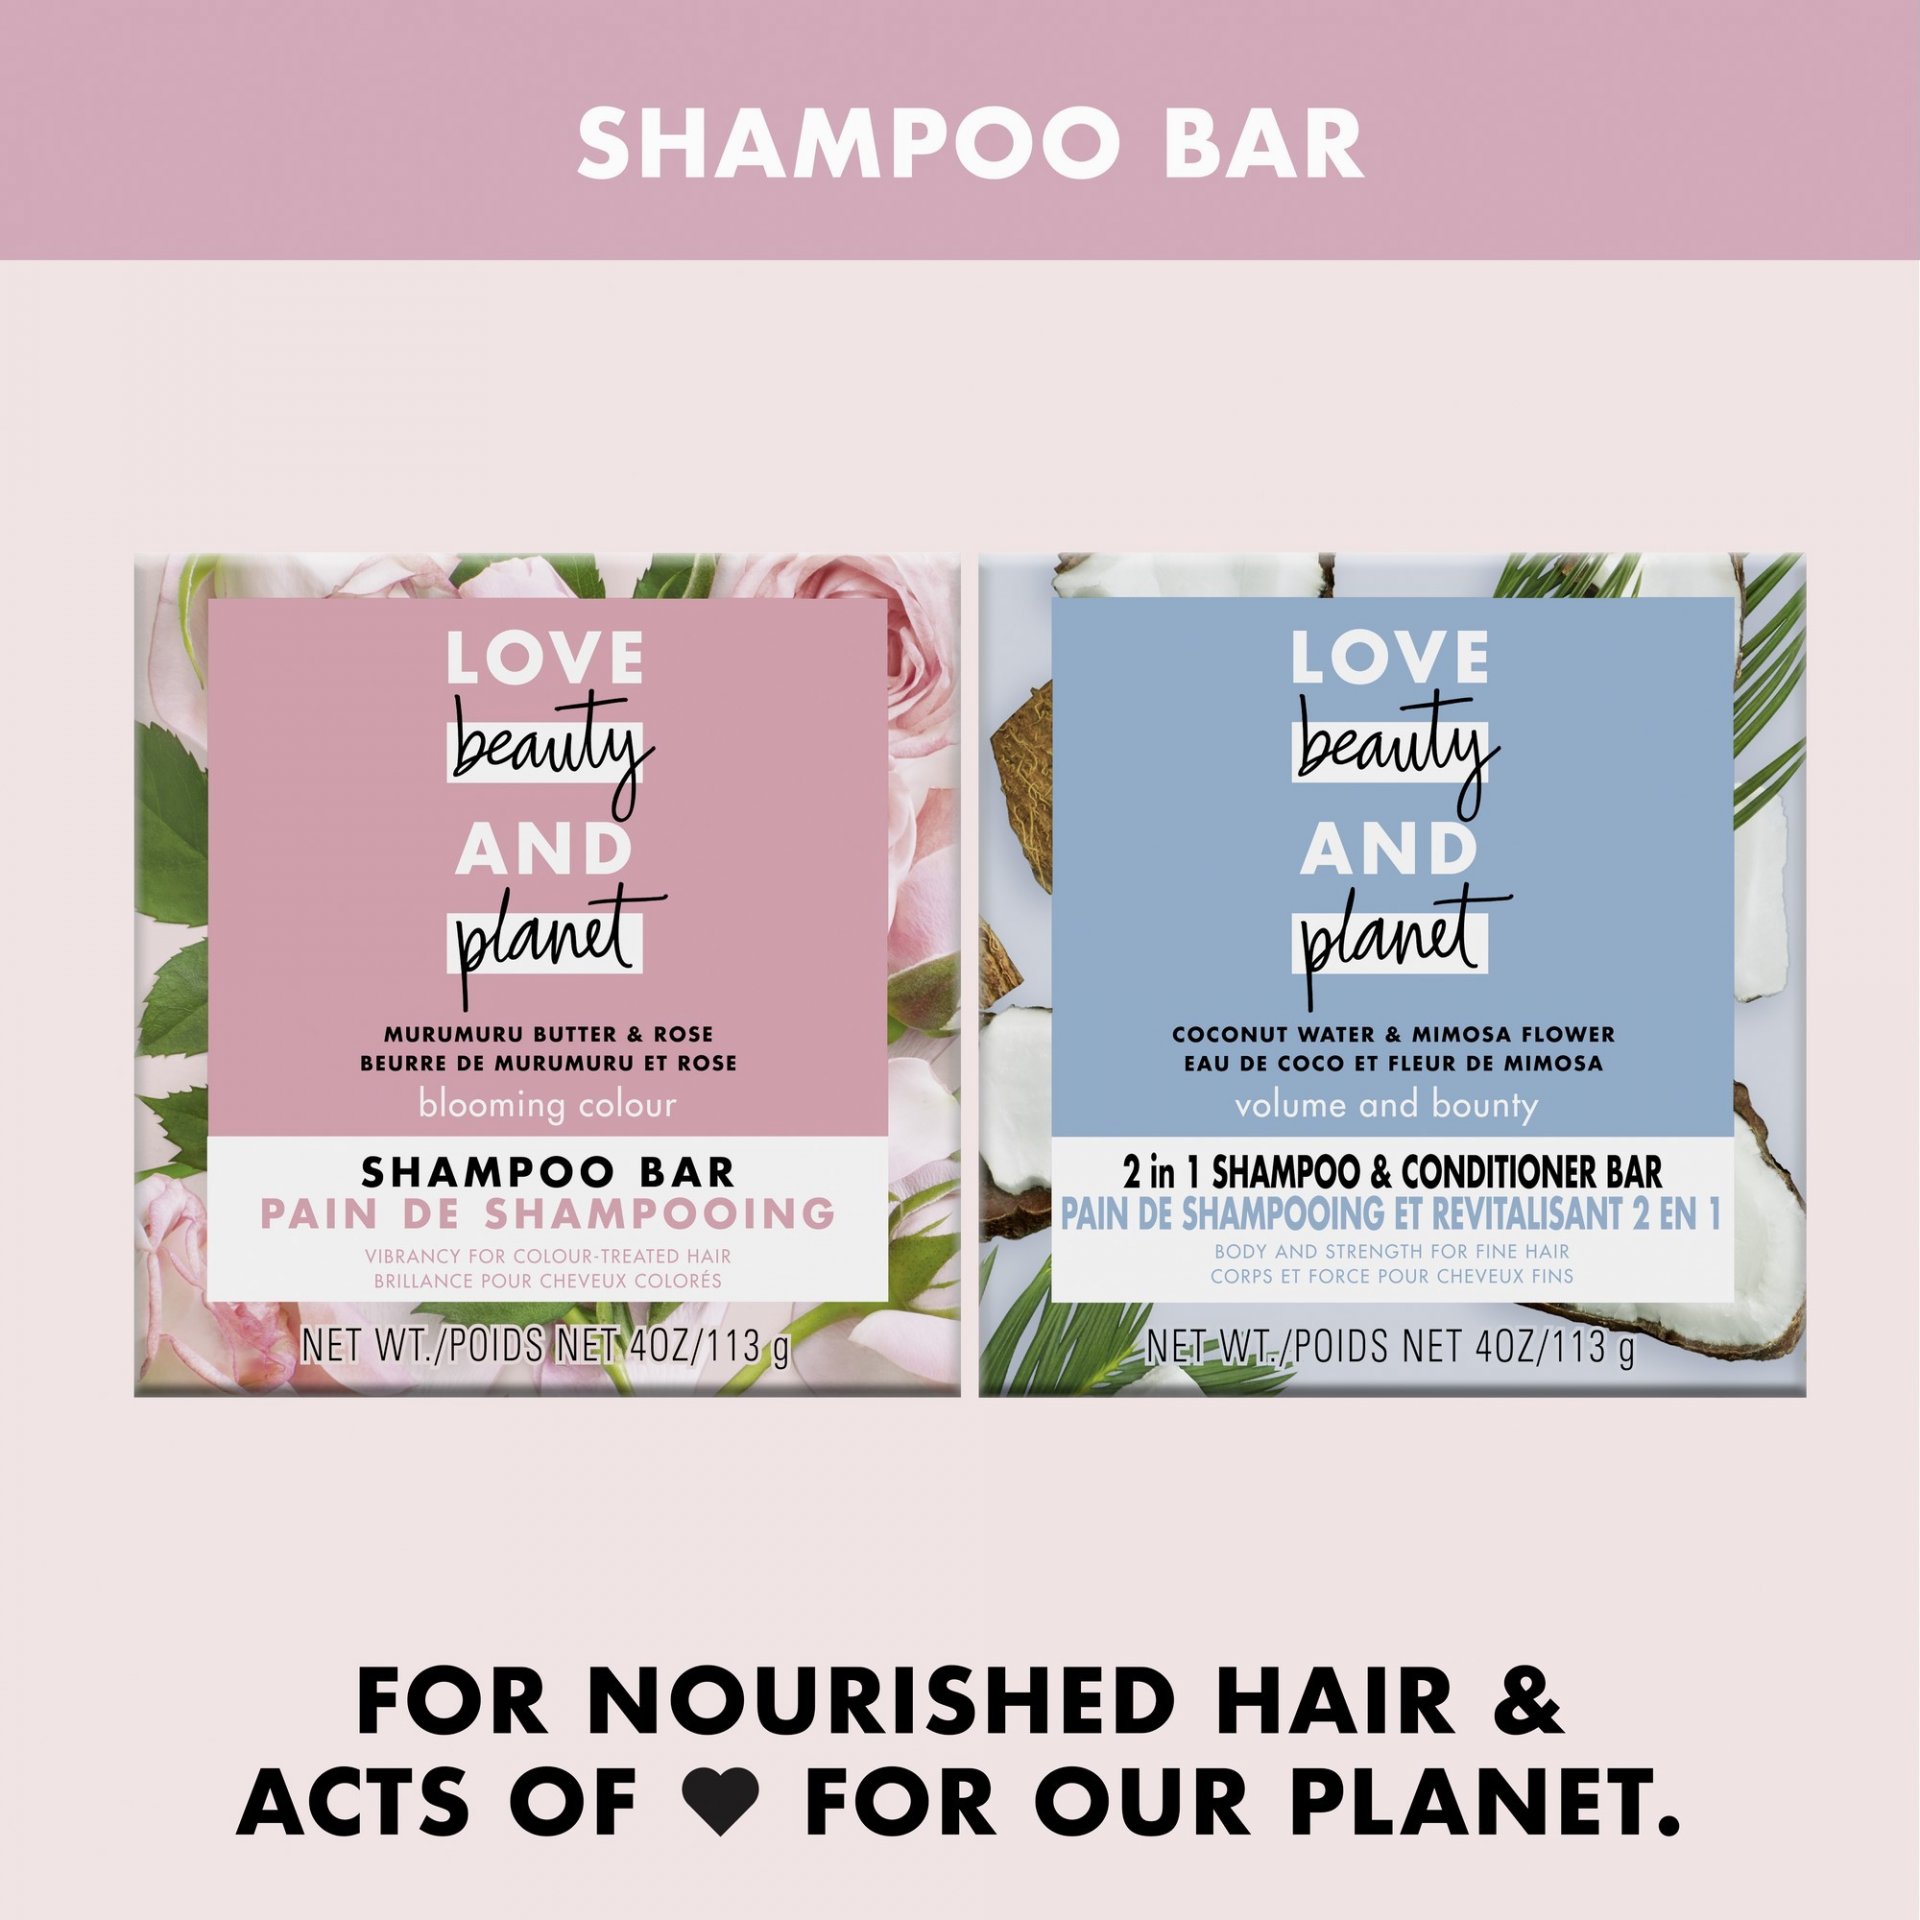 Love Beauty And Planet Blooming Color Shampoo Bar for Color Treated Hair  Murumuru Butter & Rose Color Vibrancy  oz - Shop Imported Products from  USA to India Online - iBhejo